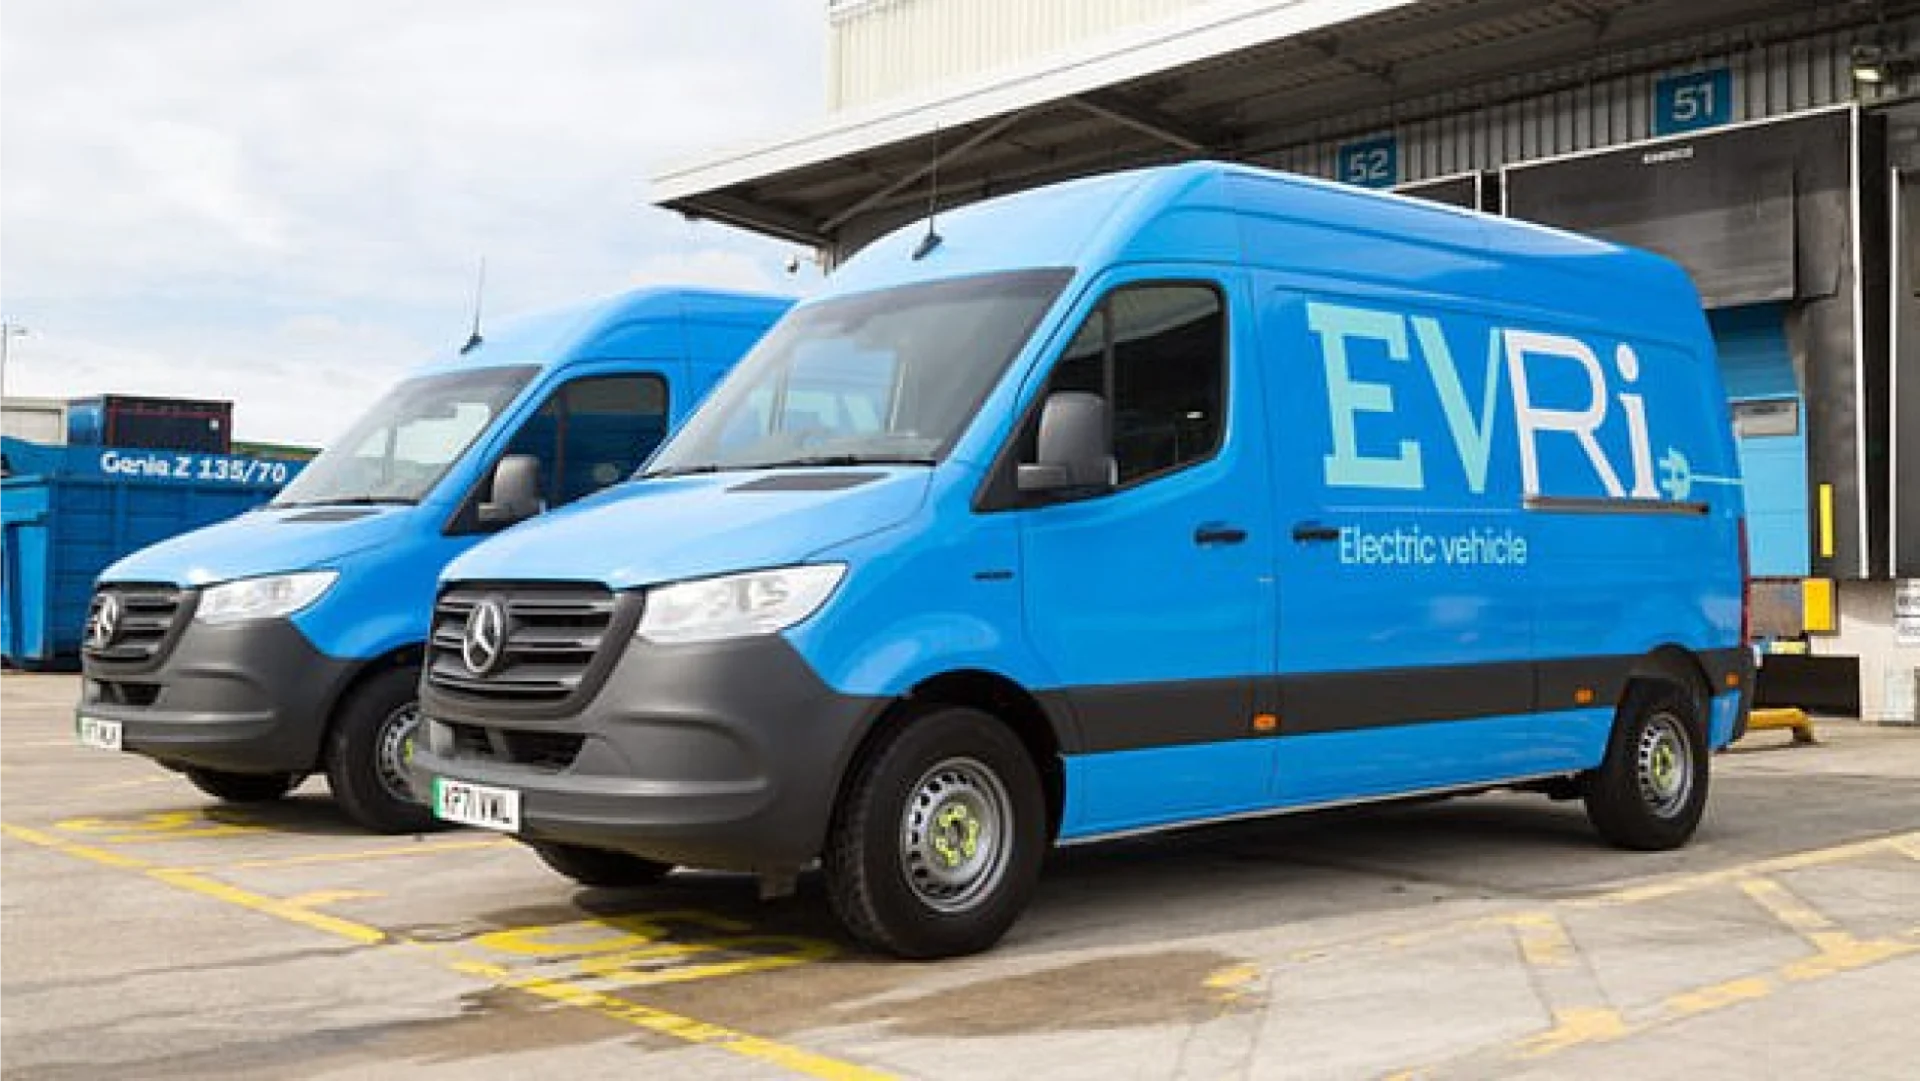 Evri Collection Van parked